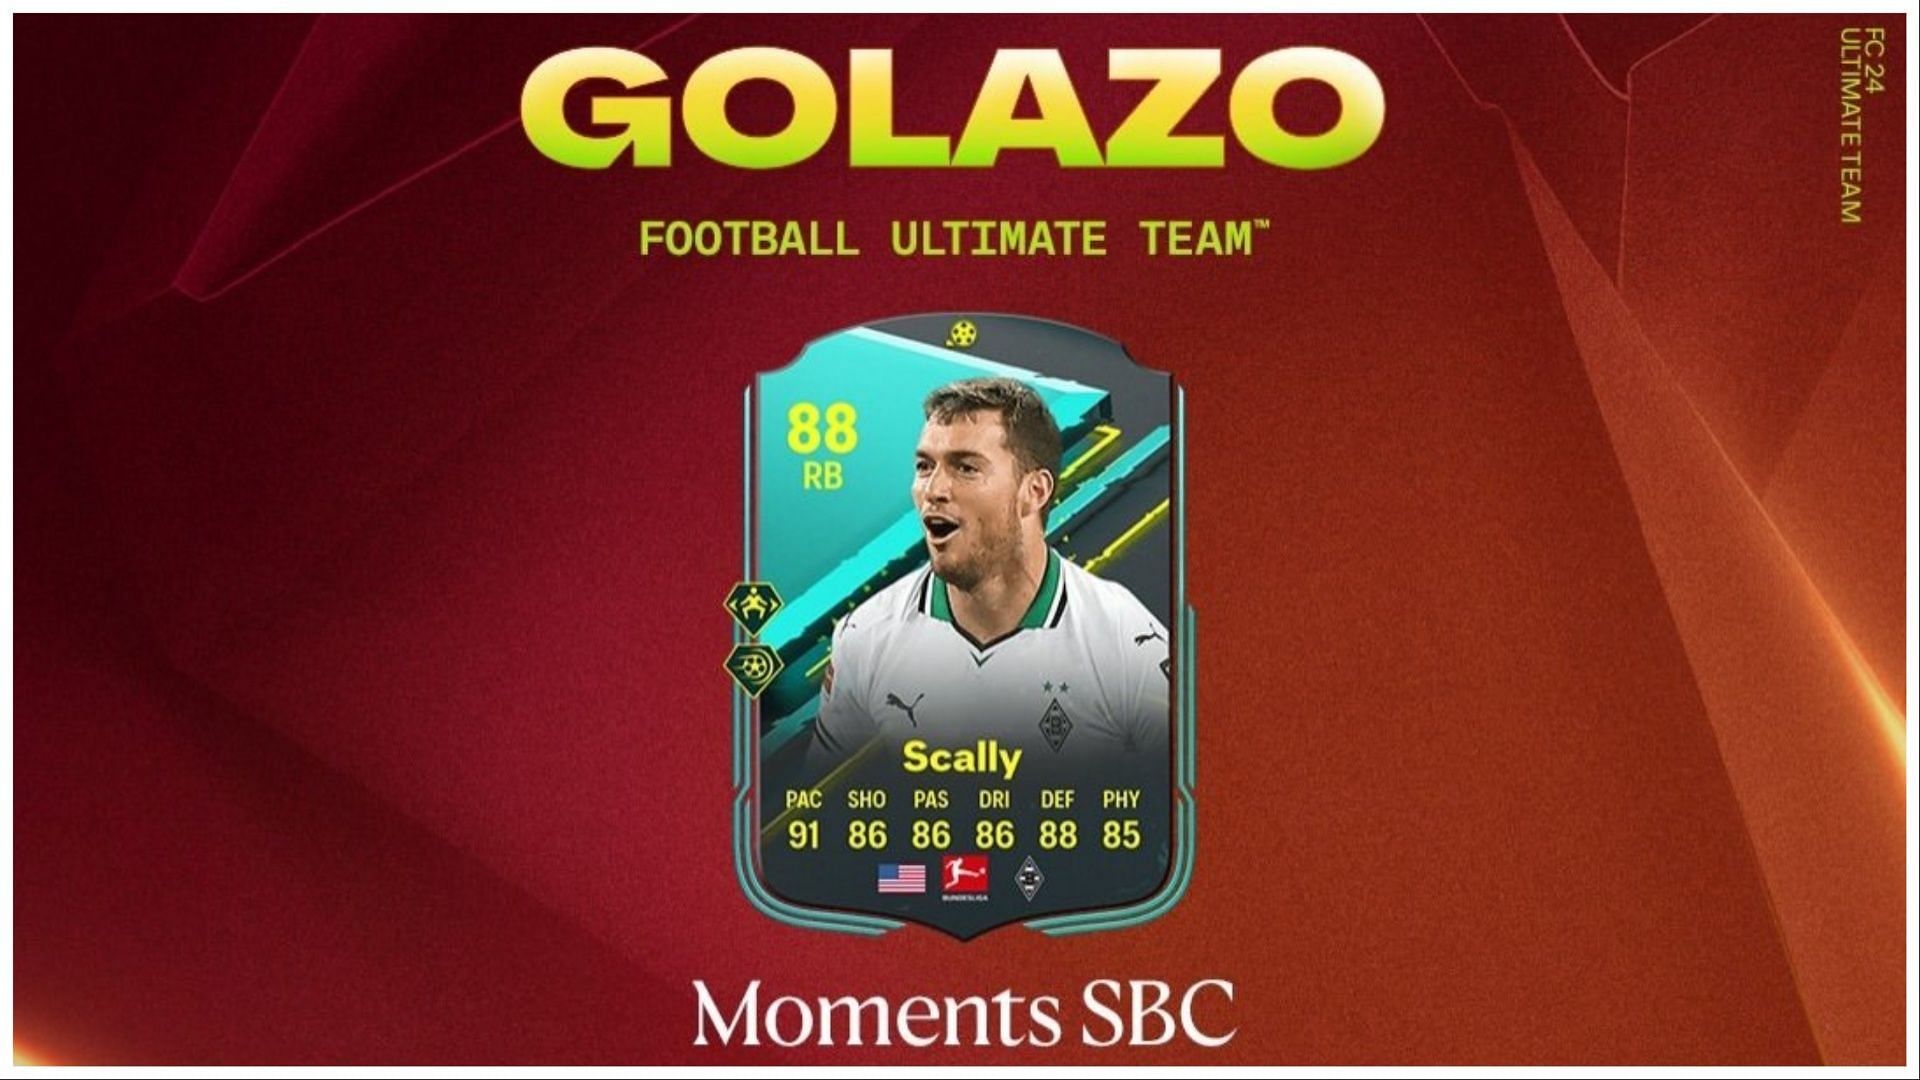 The EA FC 24 Joe Scally Player Moments SBC is now live